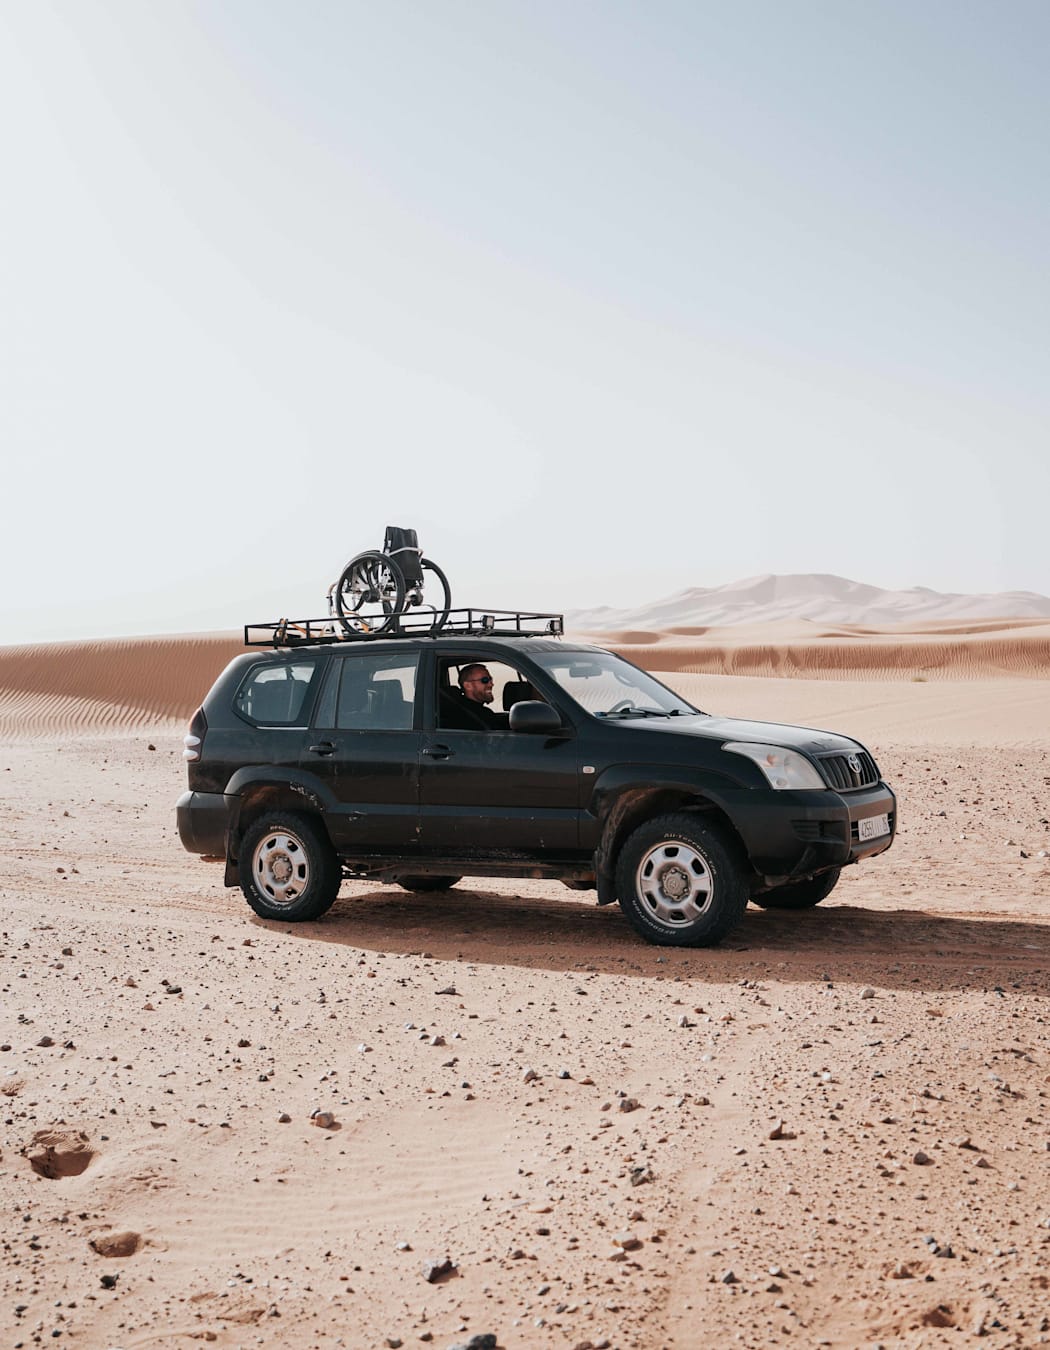 A side-profile photo of a jeep in the desert, carrying a wheelchair on it's roof.